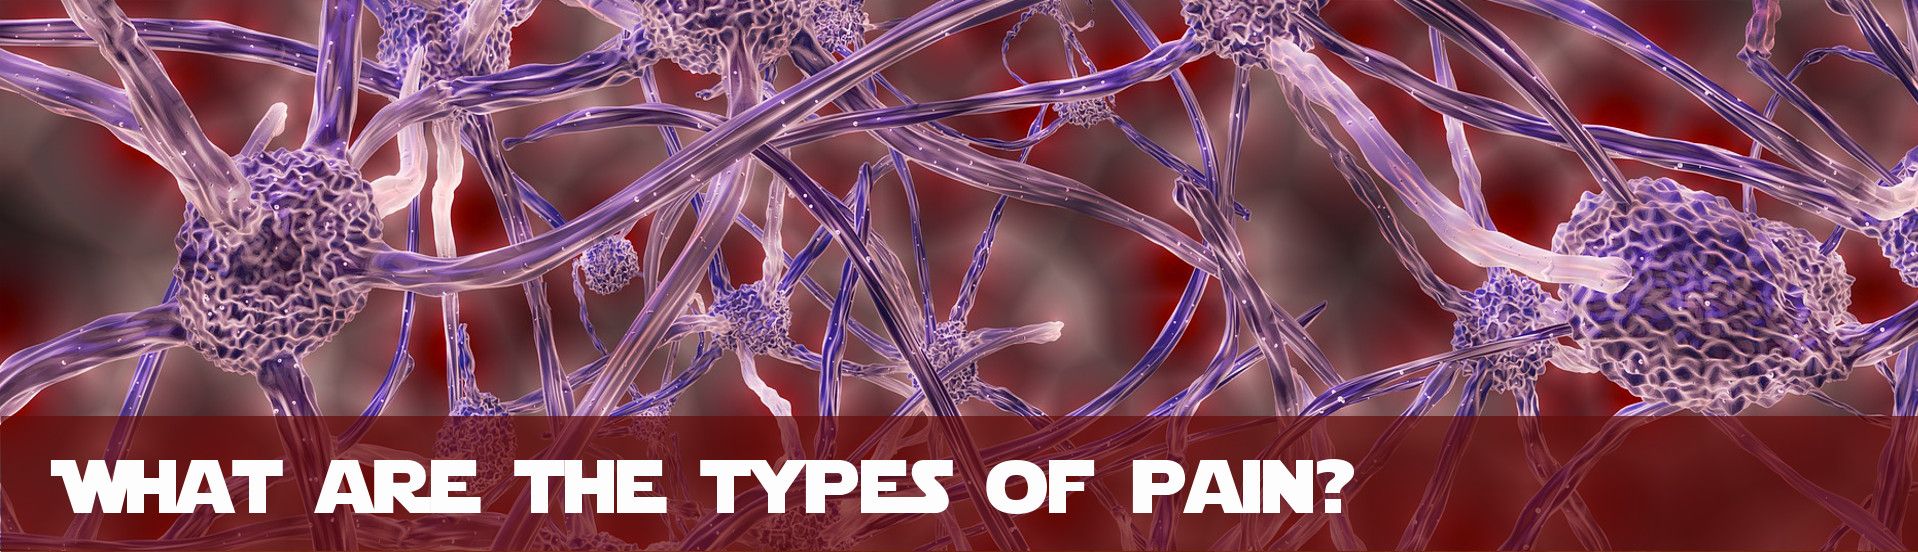 What are the different types of pain?